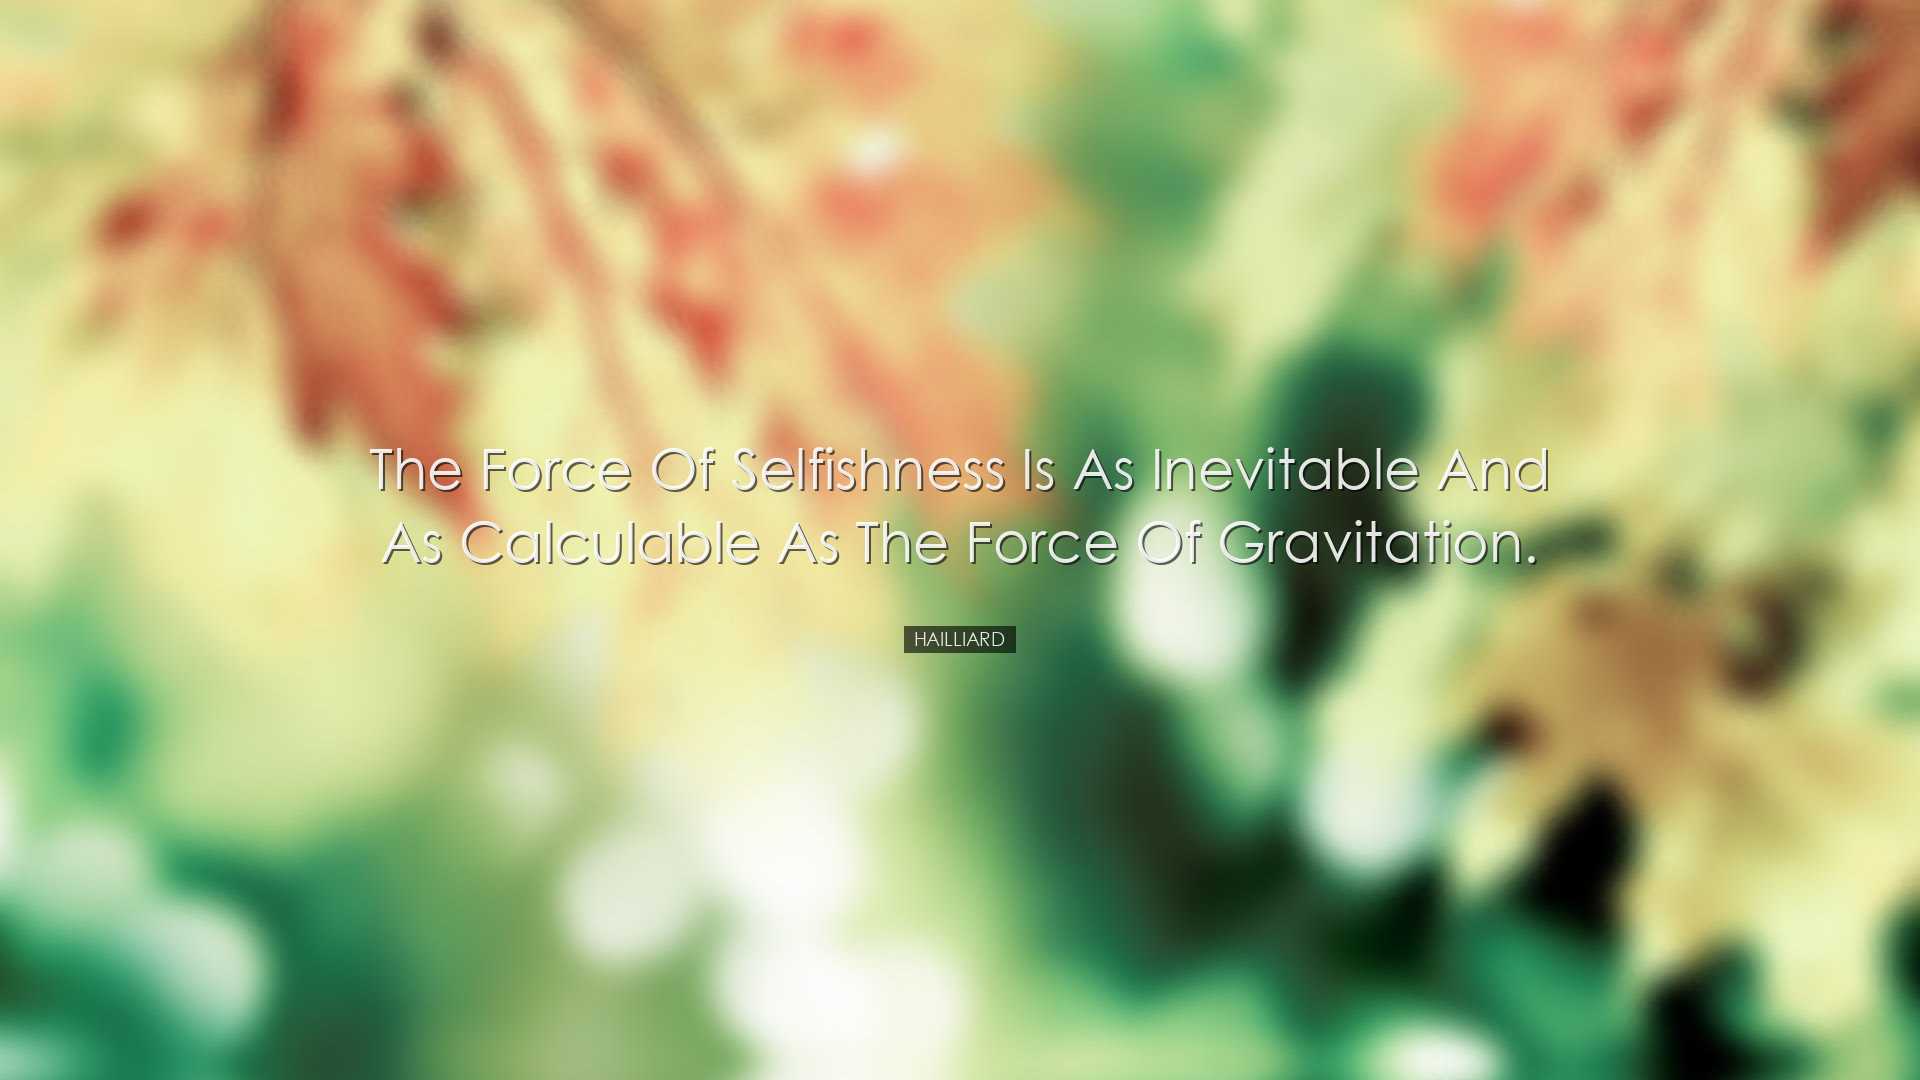 The force of selfishness is as inevitable and as calculable as the